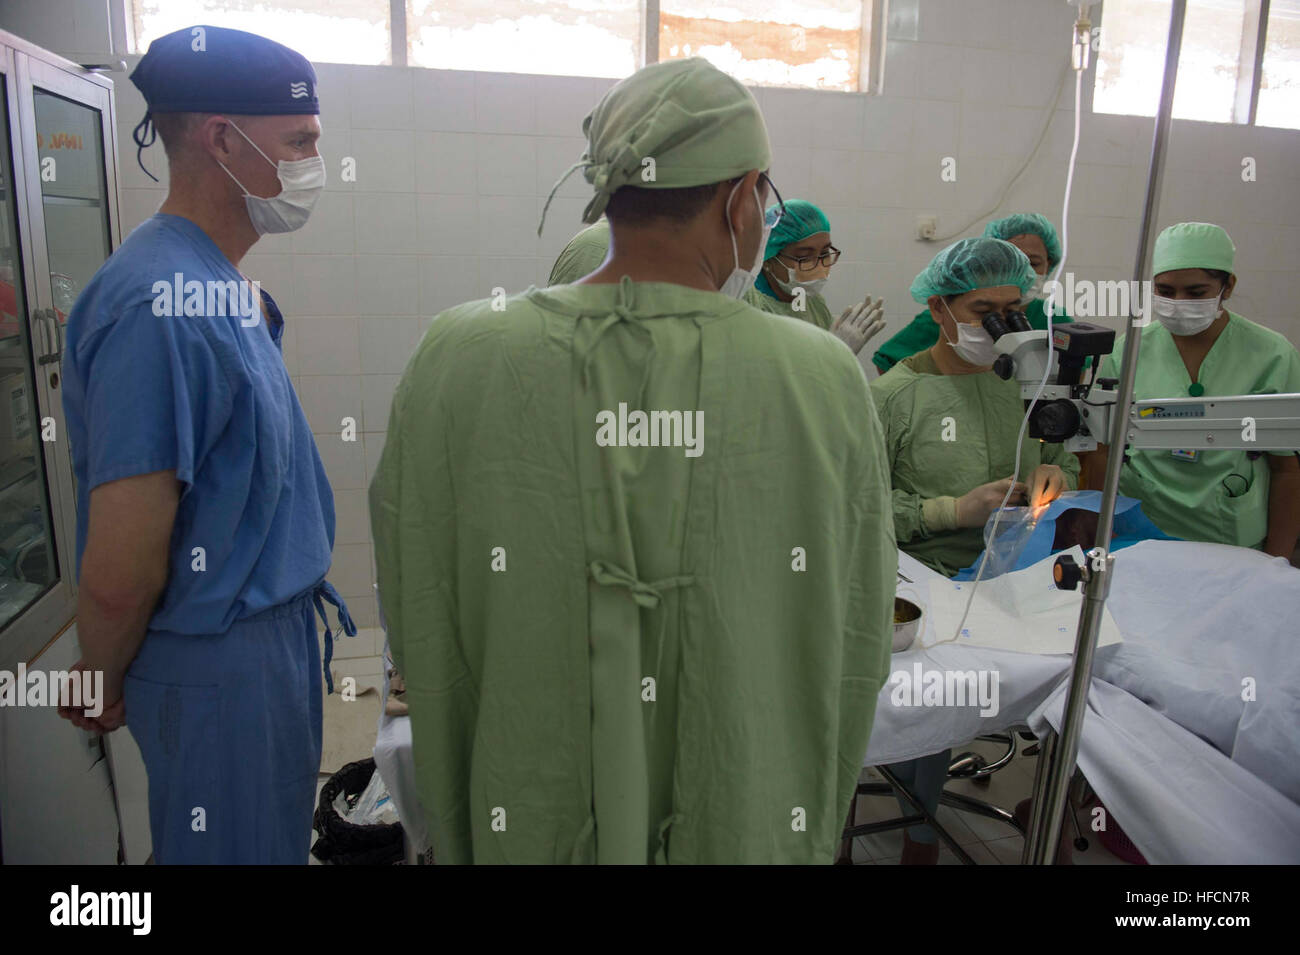 140528-N-IL267-083 BA'A, Indonesia (May 28, 2014) U.S. Navy Cmdr. Brice Nicholson, an ophthalmologist from Gig Harbor, Wash., assigned to Naval Hospital Bremerton, Hospital Corpsman 2nd Class Adam Docekal, from Centerville, Mich., and assigned to Naval Medical Center San Diego, and other volunteers listen and assist as ophthalmologist Miranda Johannes explains to ophthalmologist Republic of Singapore Air Force Senior Lt. Col. Gerard Nah how to perform a cataract surgery not typically used in Singapore or the United States during a subject matter expert exchange at Ba’a Subdistrict General Hosp Stock Photo